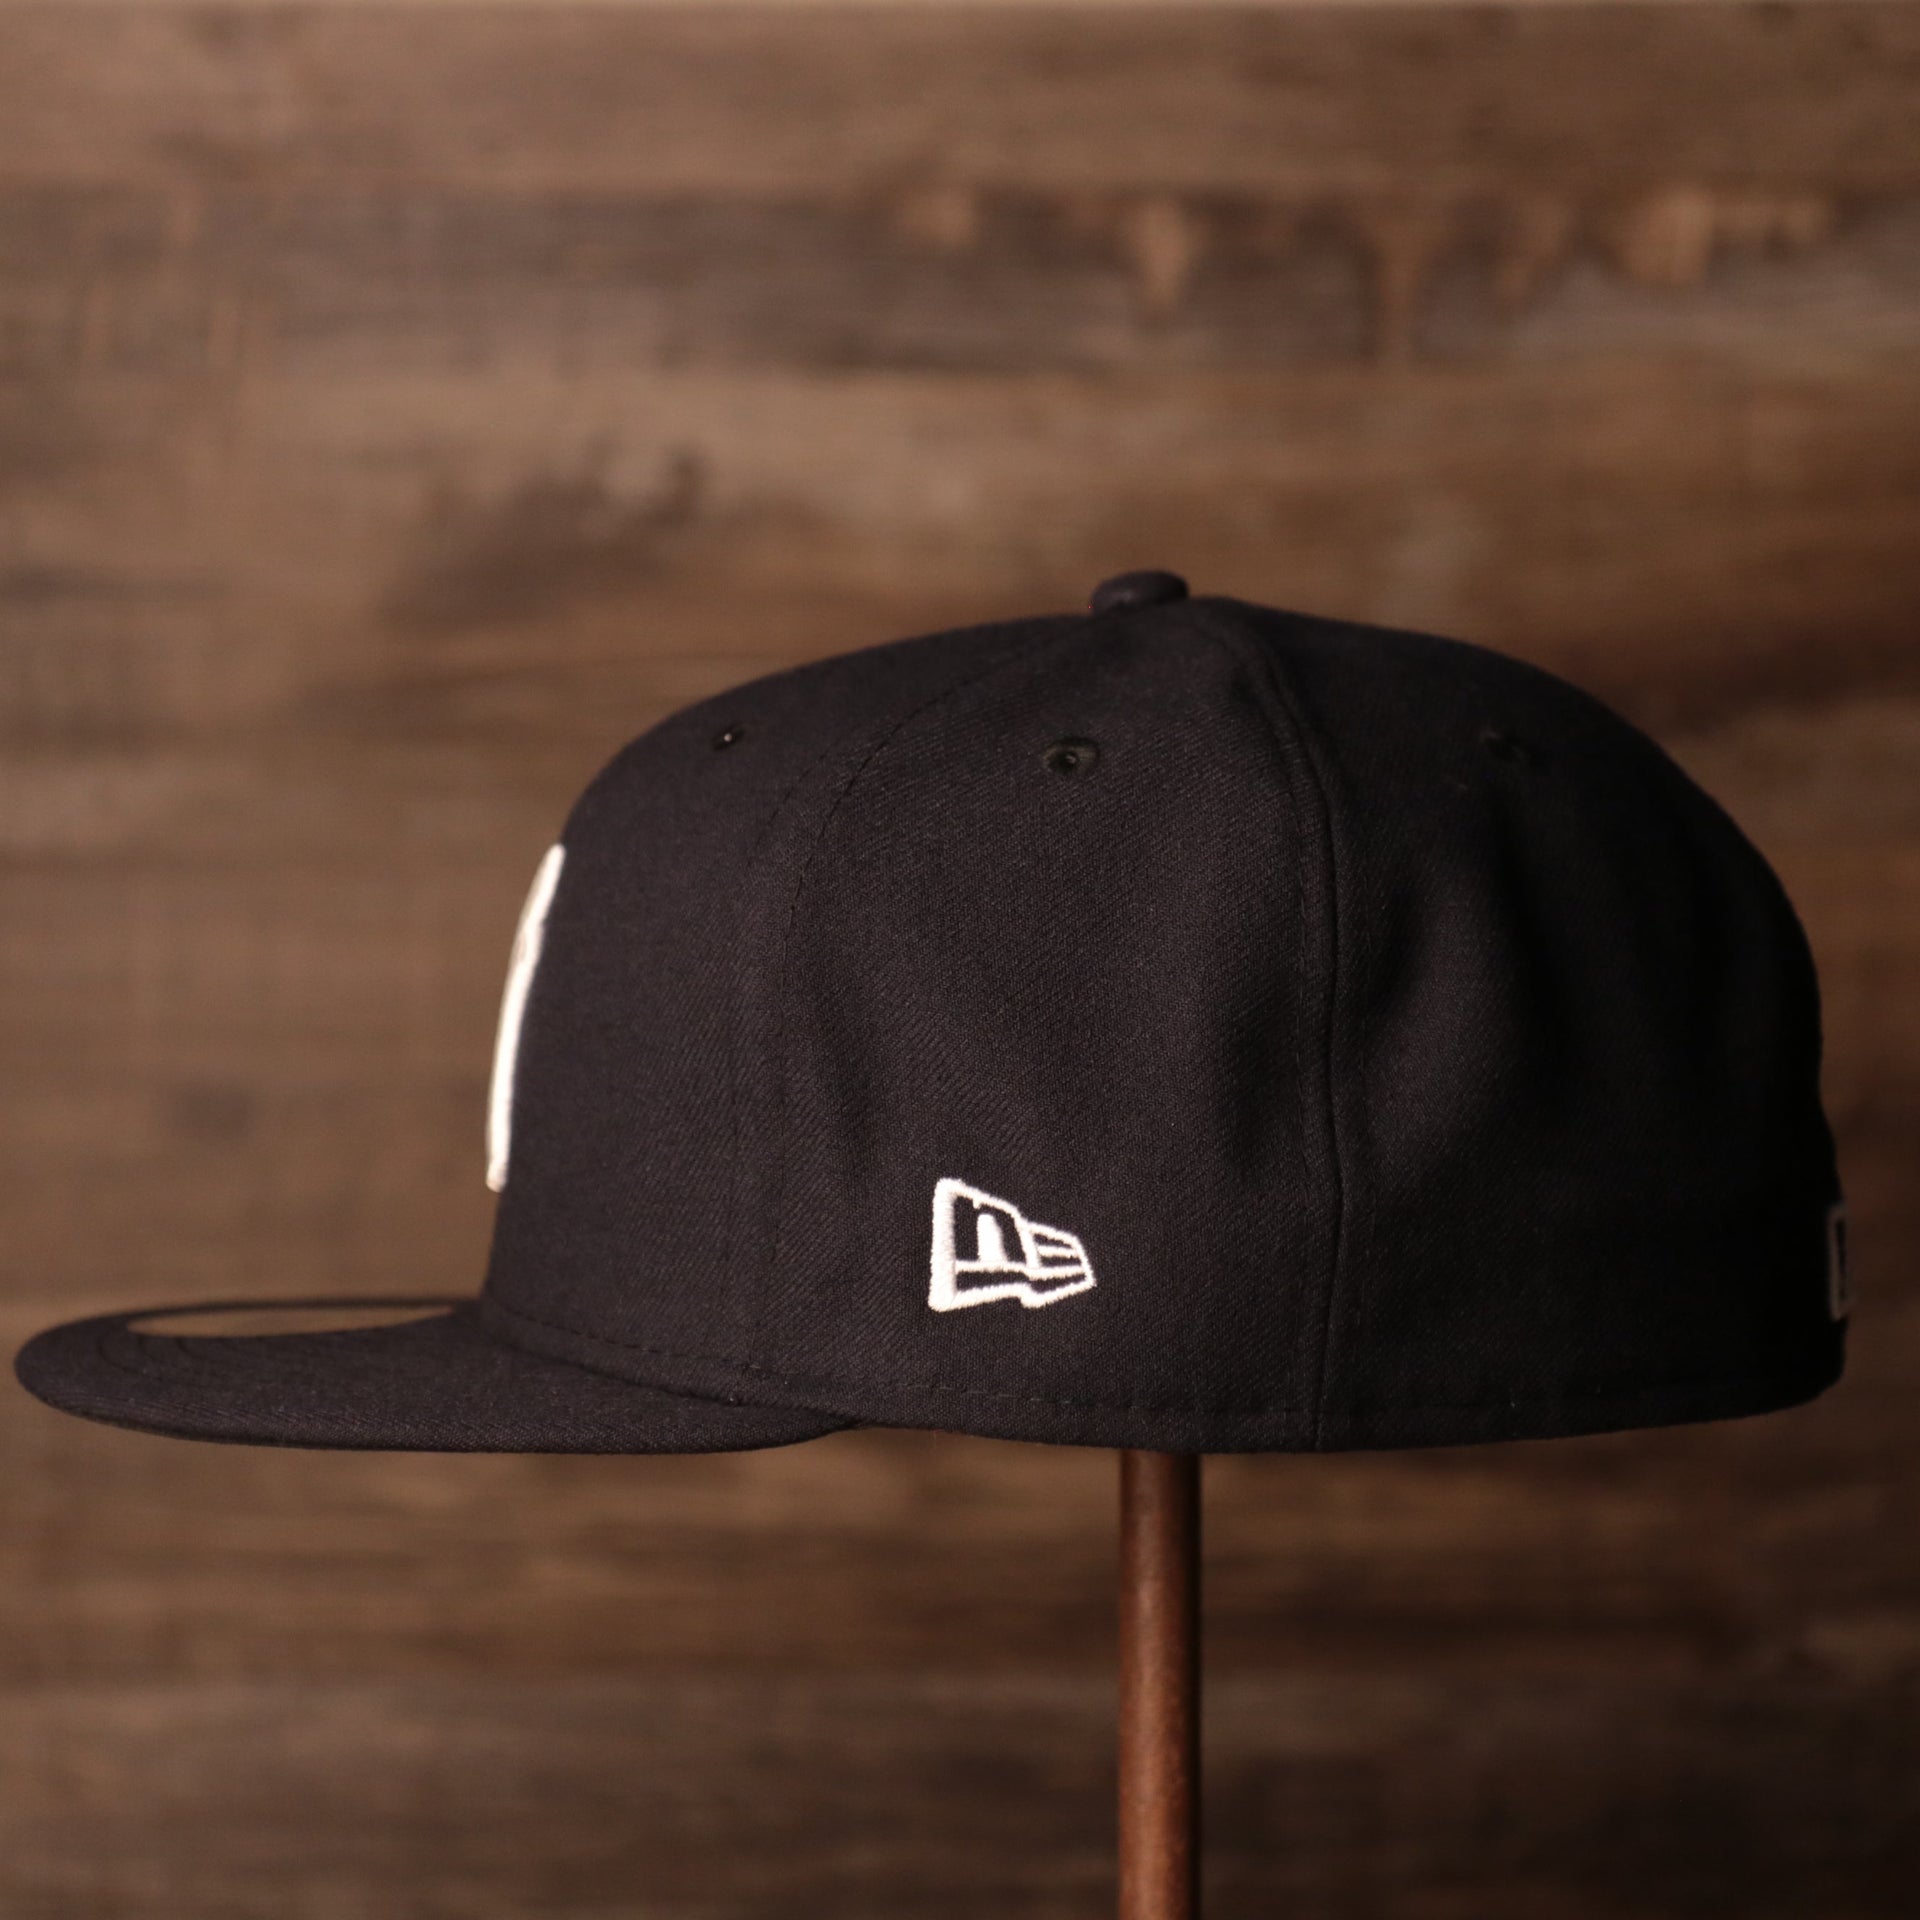 the wearers left side has the new era logo Yankees Black Bottom Fitted Cap | New York Yankees On-Field Black Underbrim Fitted Hat